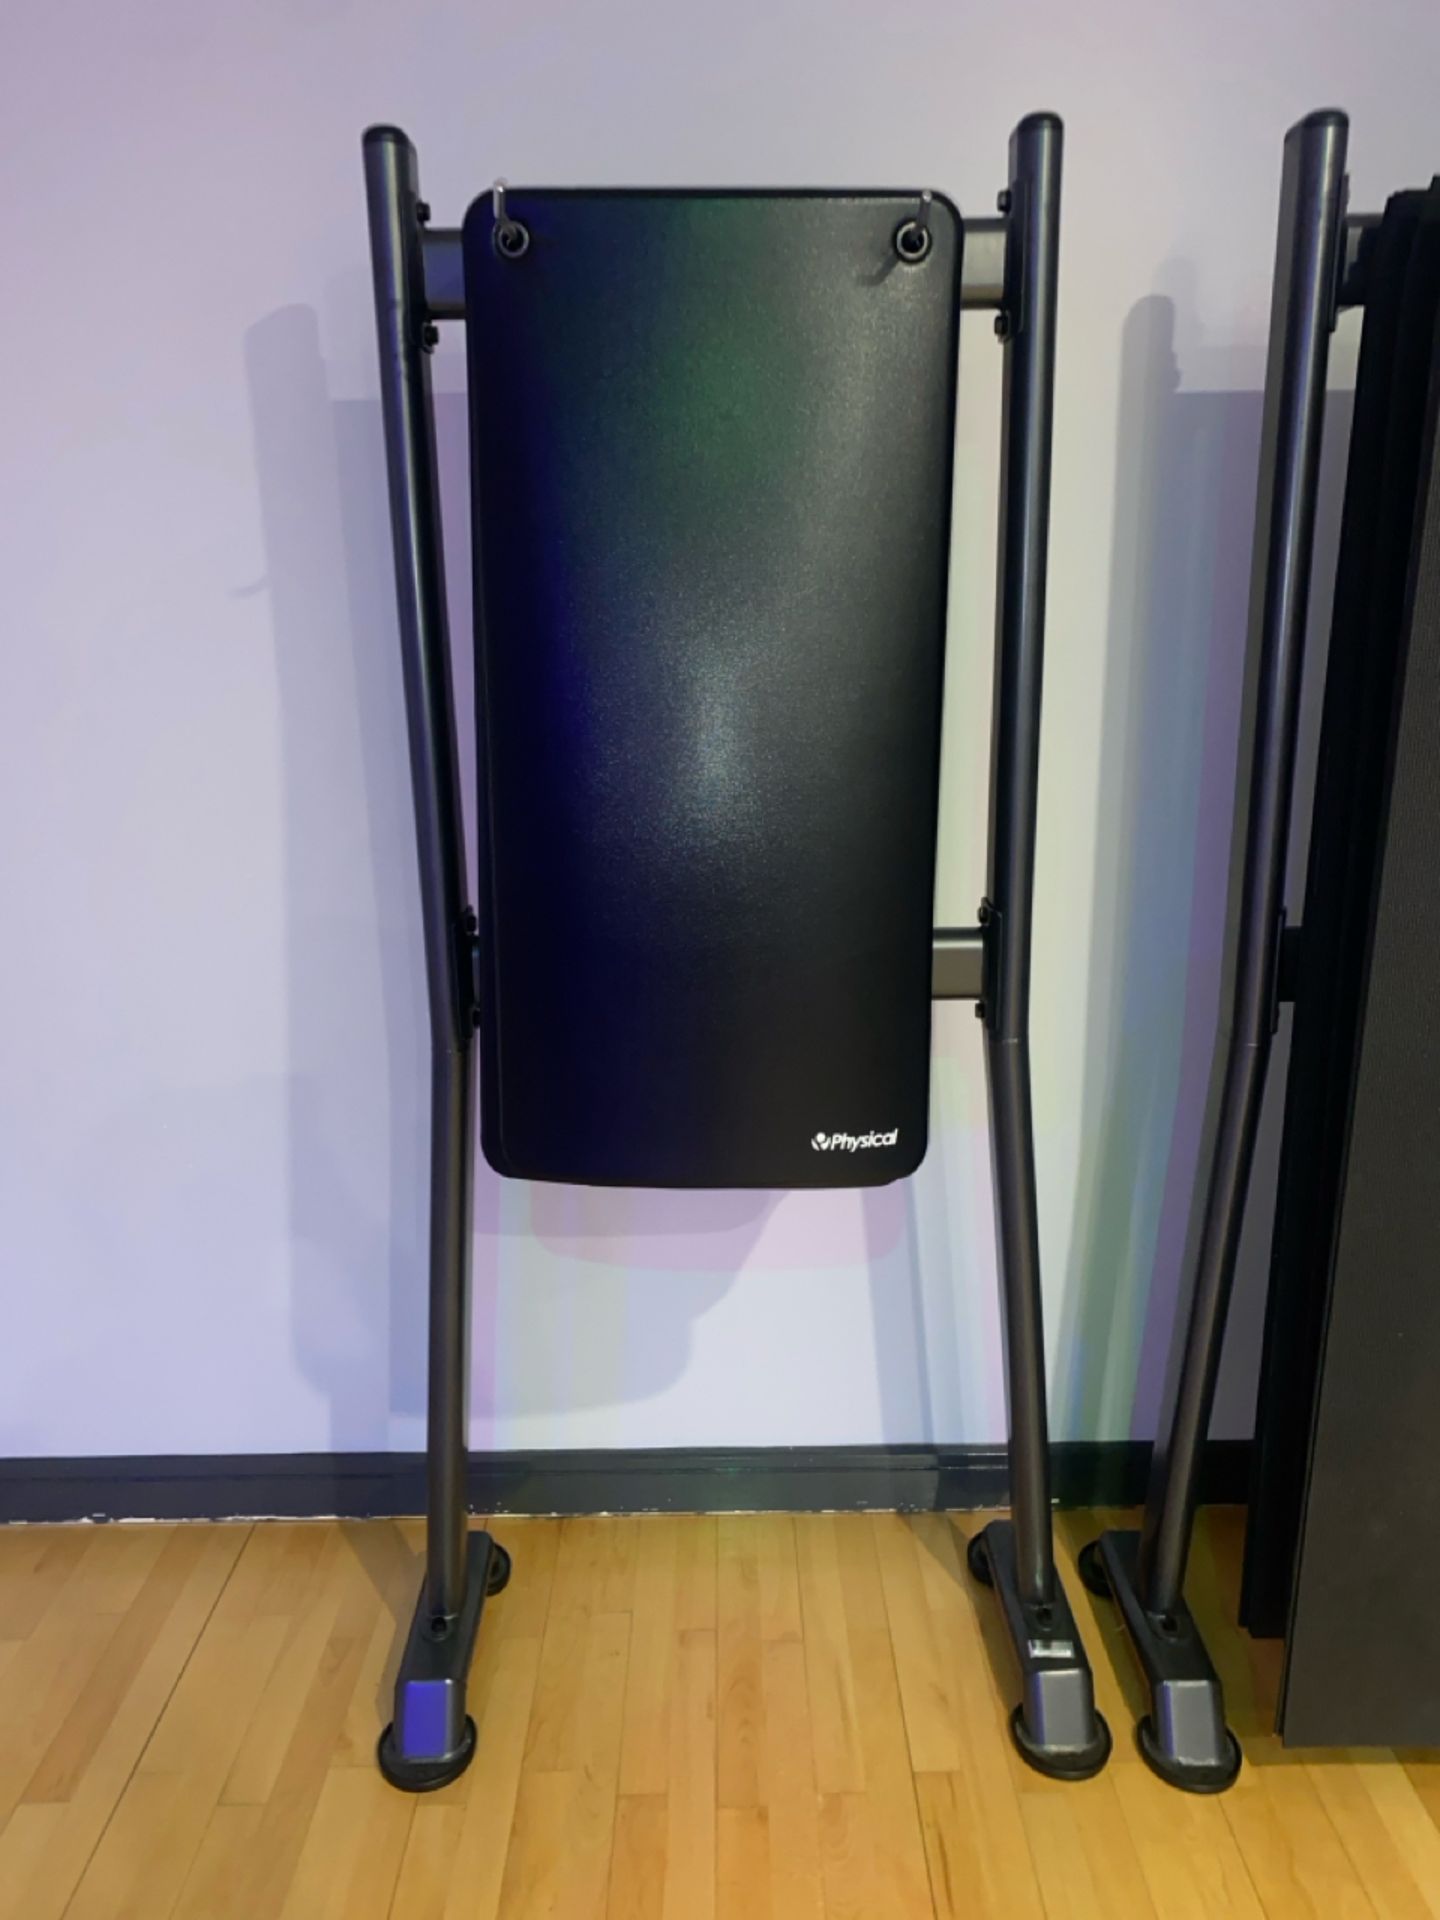 Physical & Bodyzen Mats With Stands x2 - Image 3 of 8